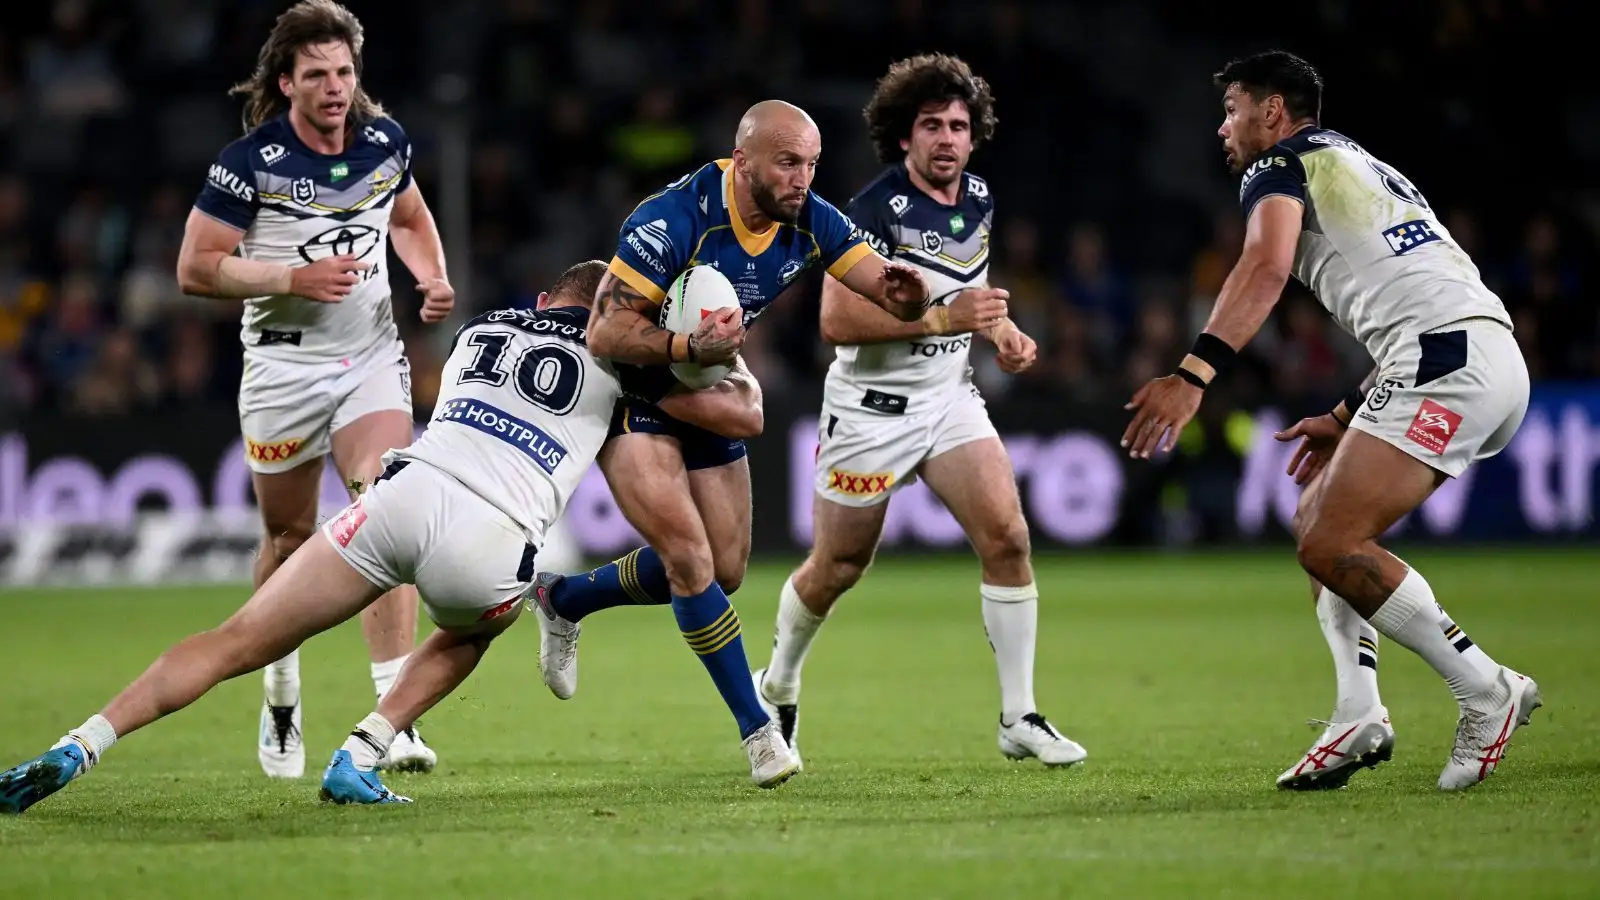 Josh Hodgson in action for Parramatta Eels against North Queensland Cowboys. Photo by Australian Associated Press/Alamy Live News.